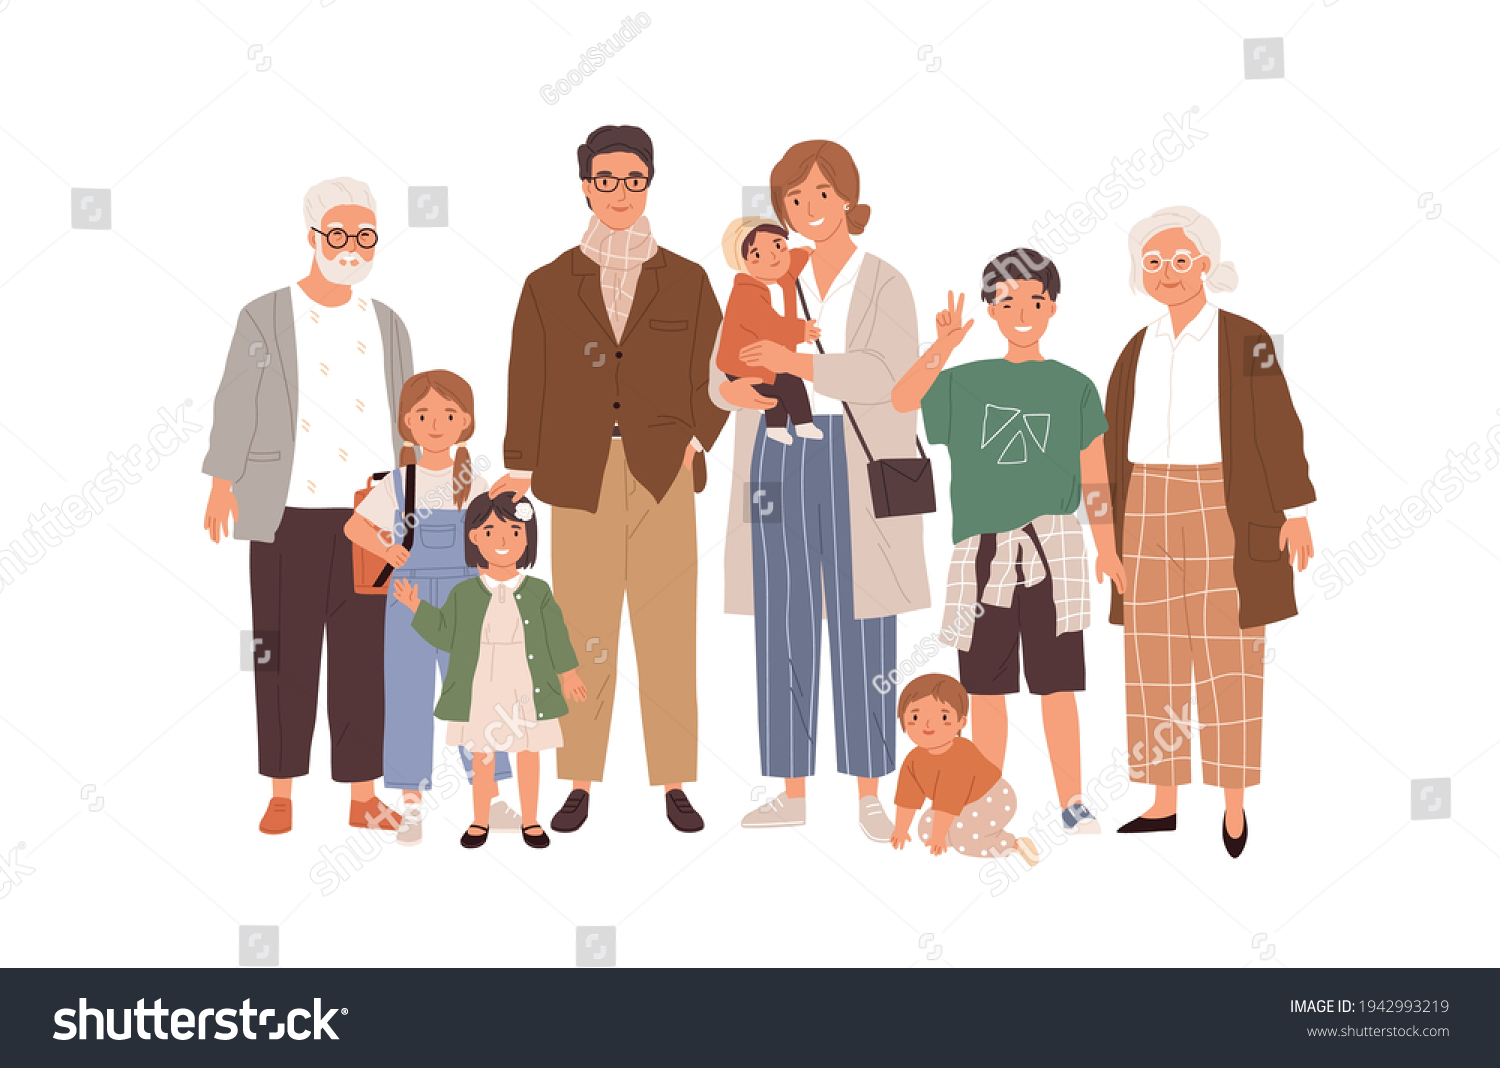 Portrait of big happy family with children, mother, father, grandfather and grandmother isolated on white background. Parents, grandparents and grandchildren. Colored flat vector illustration #1942993219